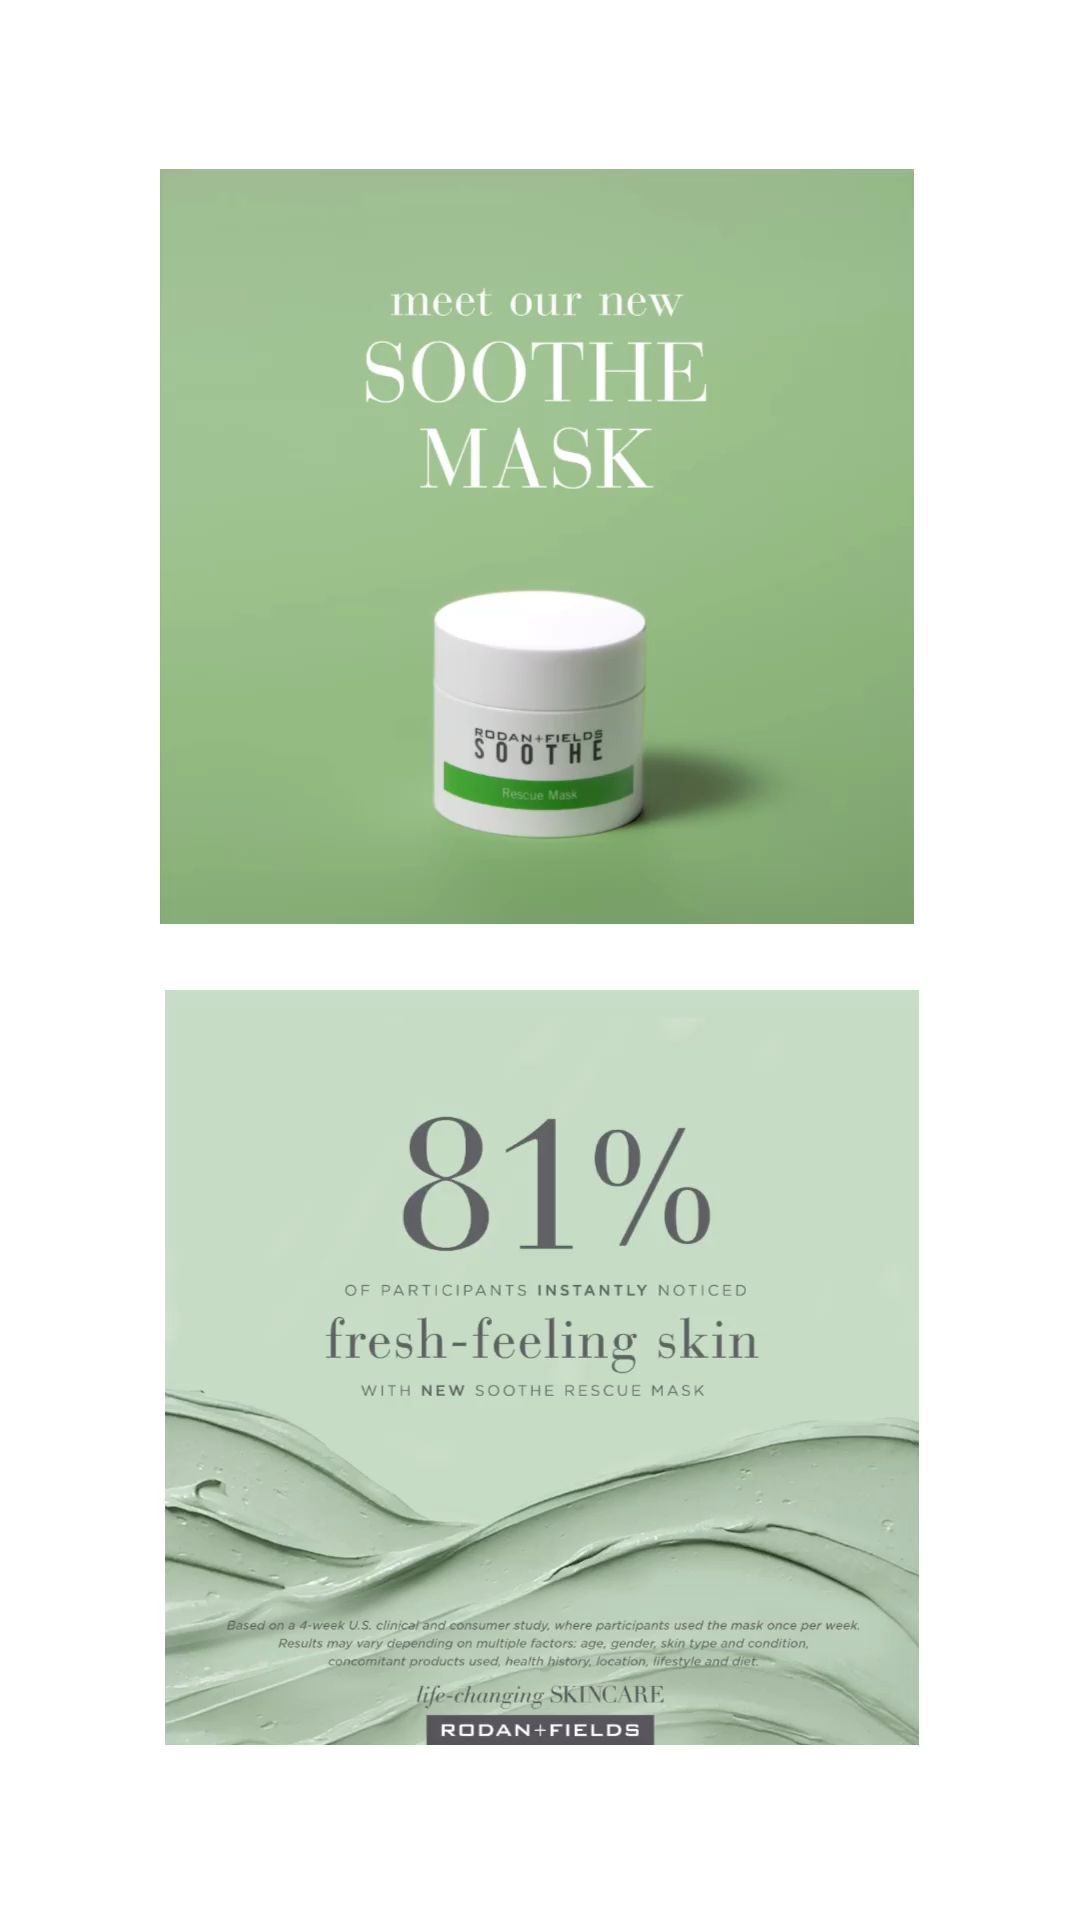 Meet our new SOOTHE MASK - Meet our new SOOTHE MASK -   beauty Products ads